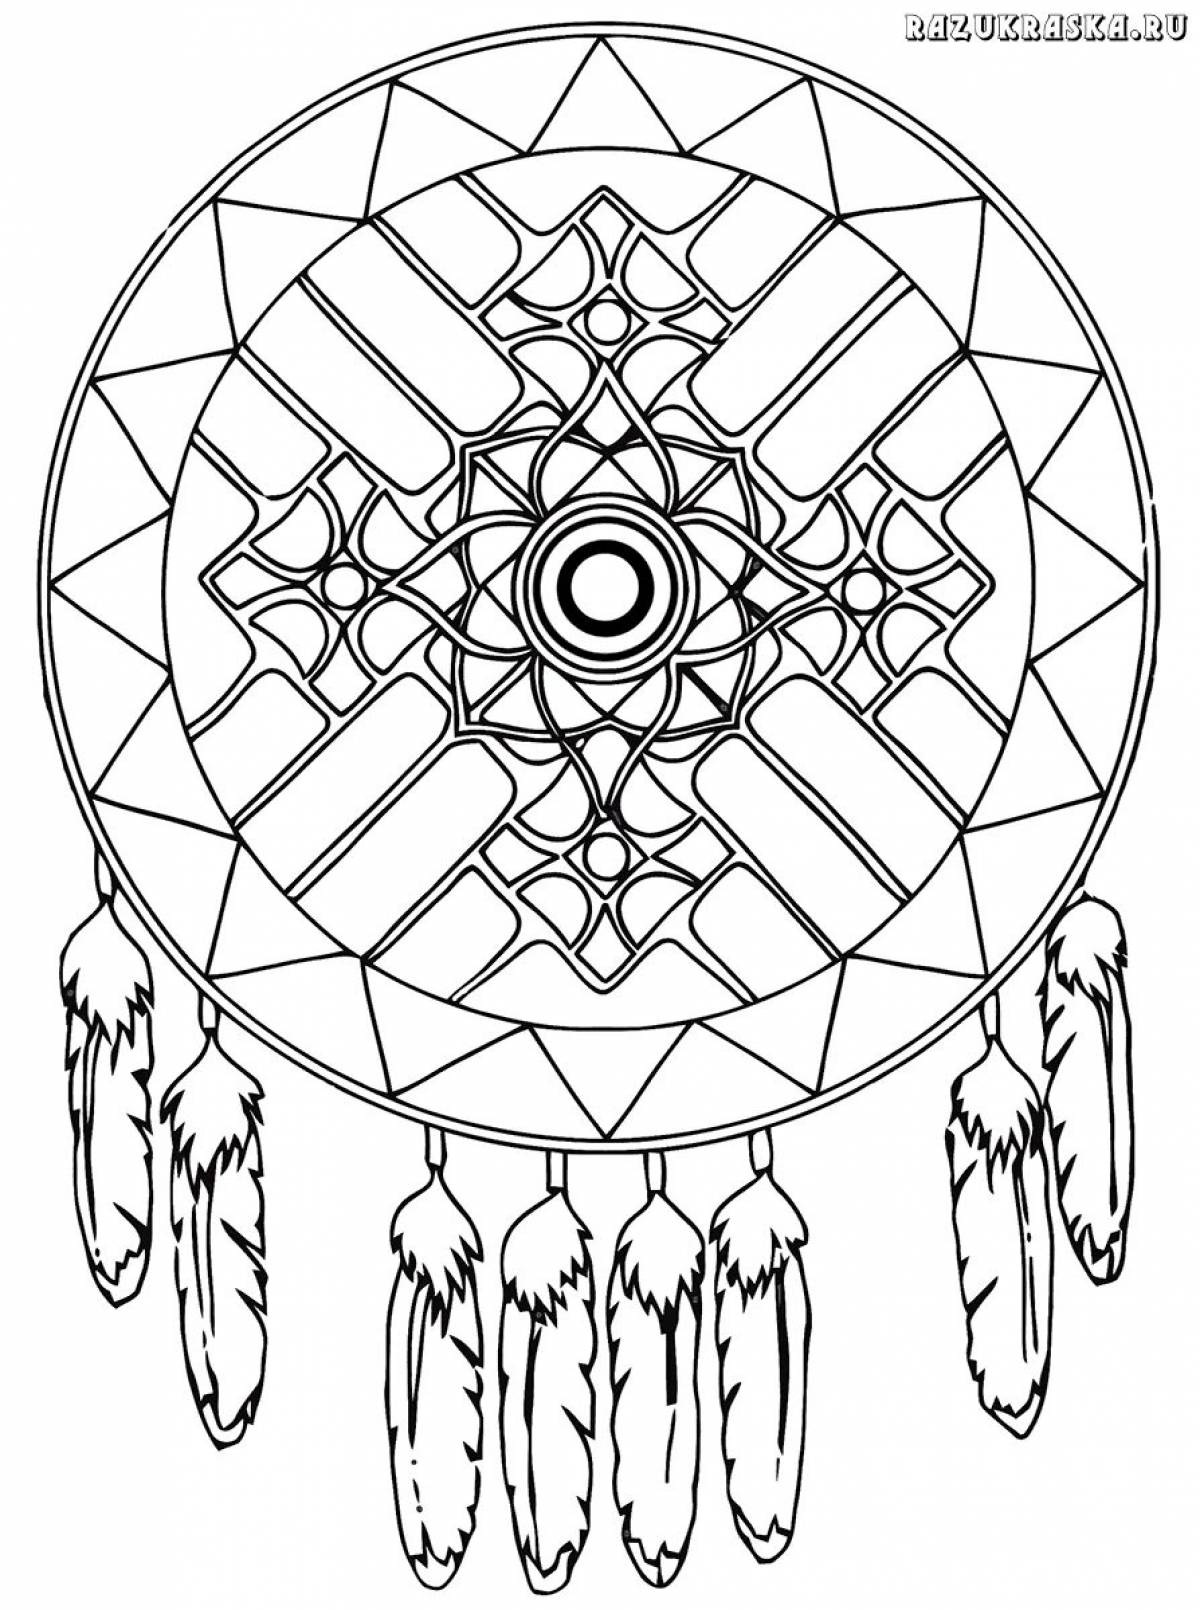 Exciting coloring book antistress dream catcher